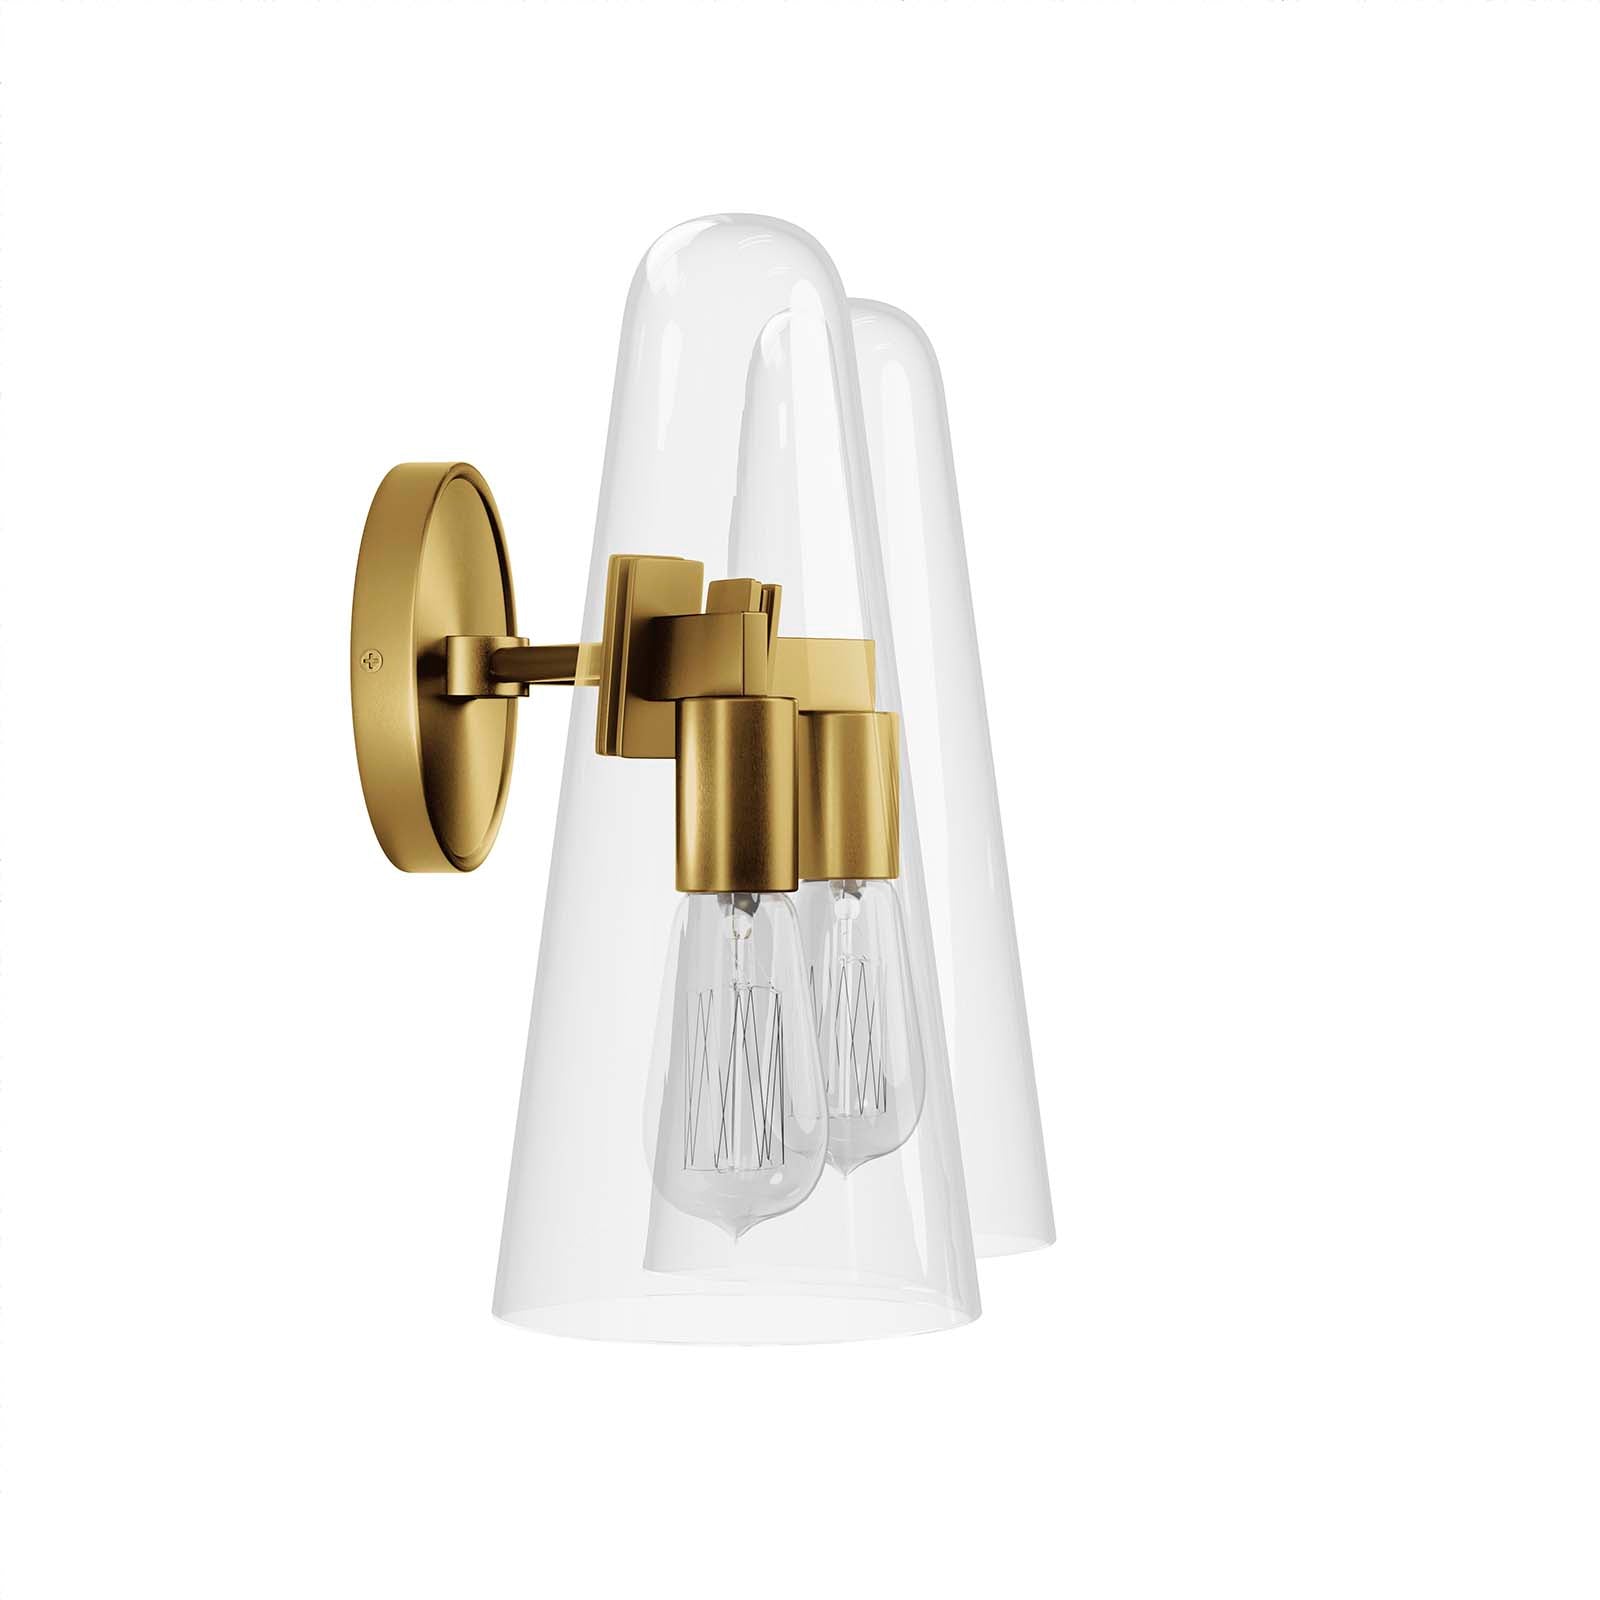 Modway Wall Sconces - Beacon 2-Light Wall Sconce Clear Satin Brass